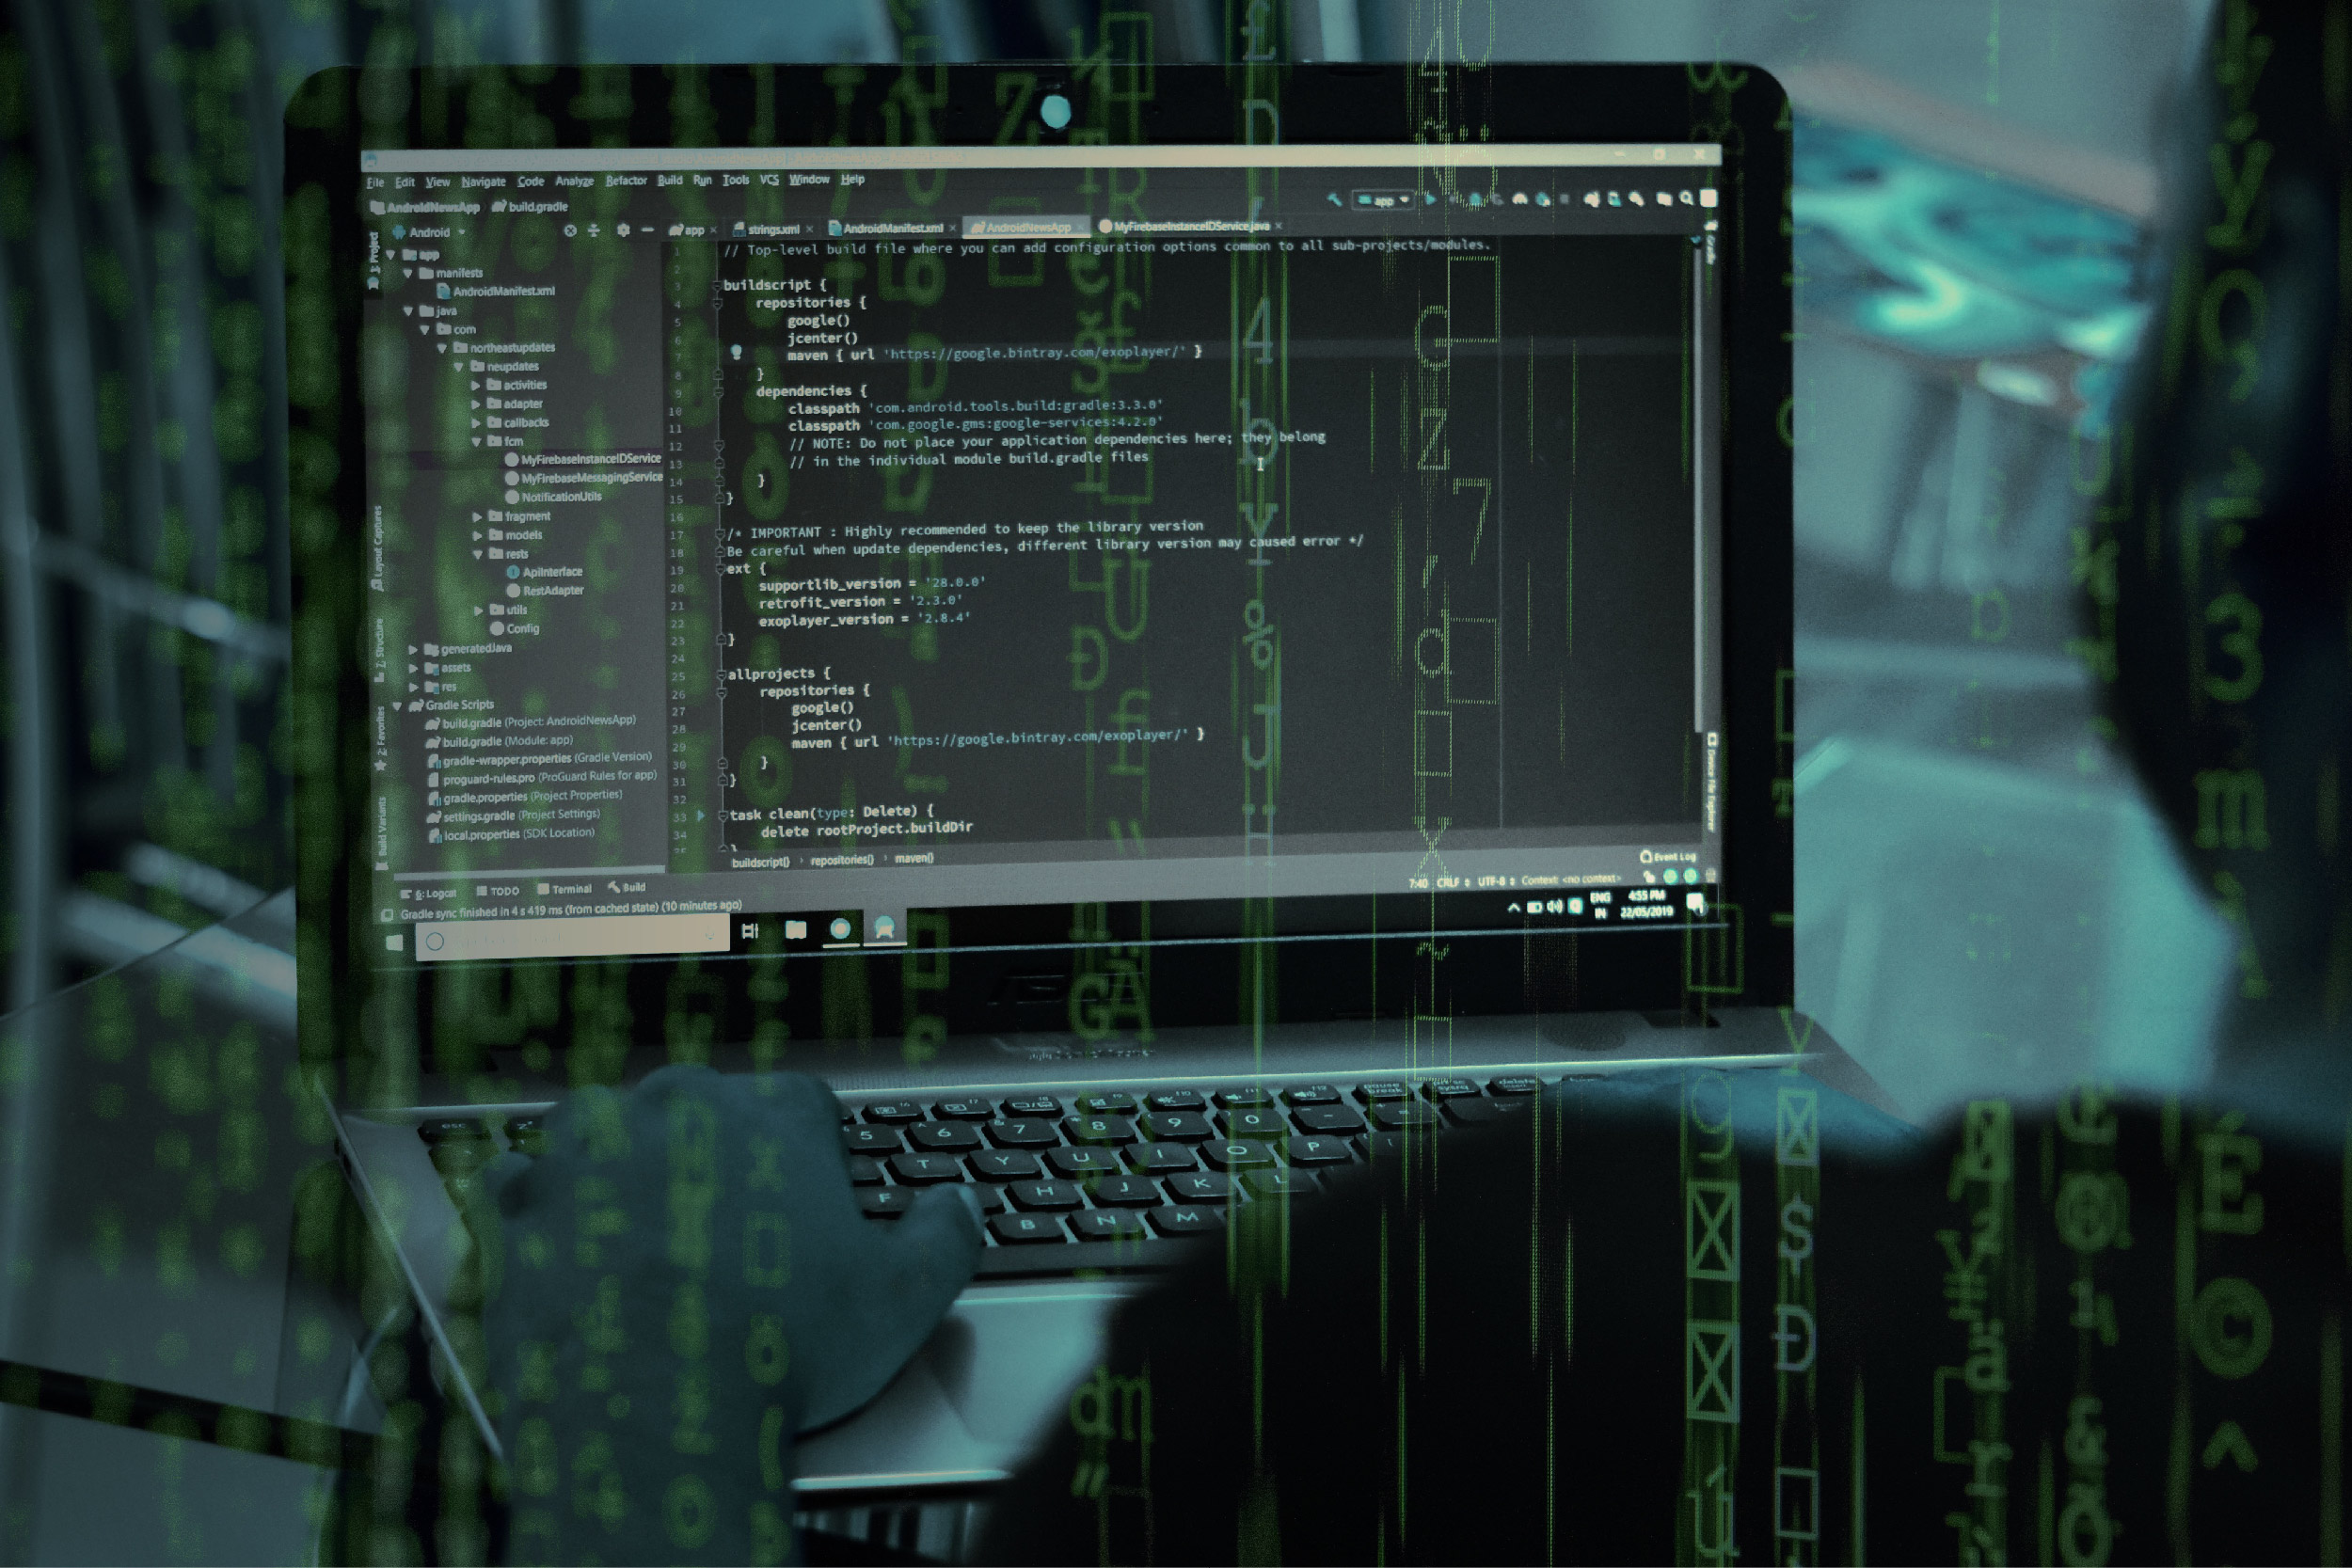 Desktop Source Code And Technology Background, Developer Or Programer With  Coding And Programming, Wallpaper By Computer Language And Source Code,  Computer Virus And Malware Attack. Stock Photo, Picture and Royalty Free  Image.